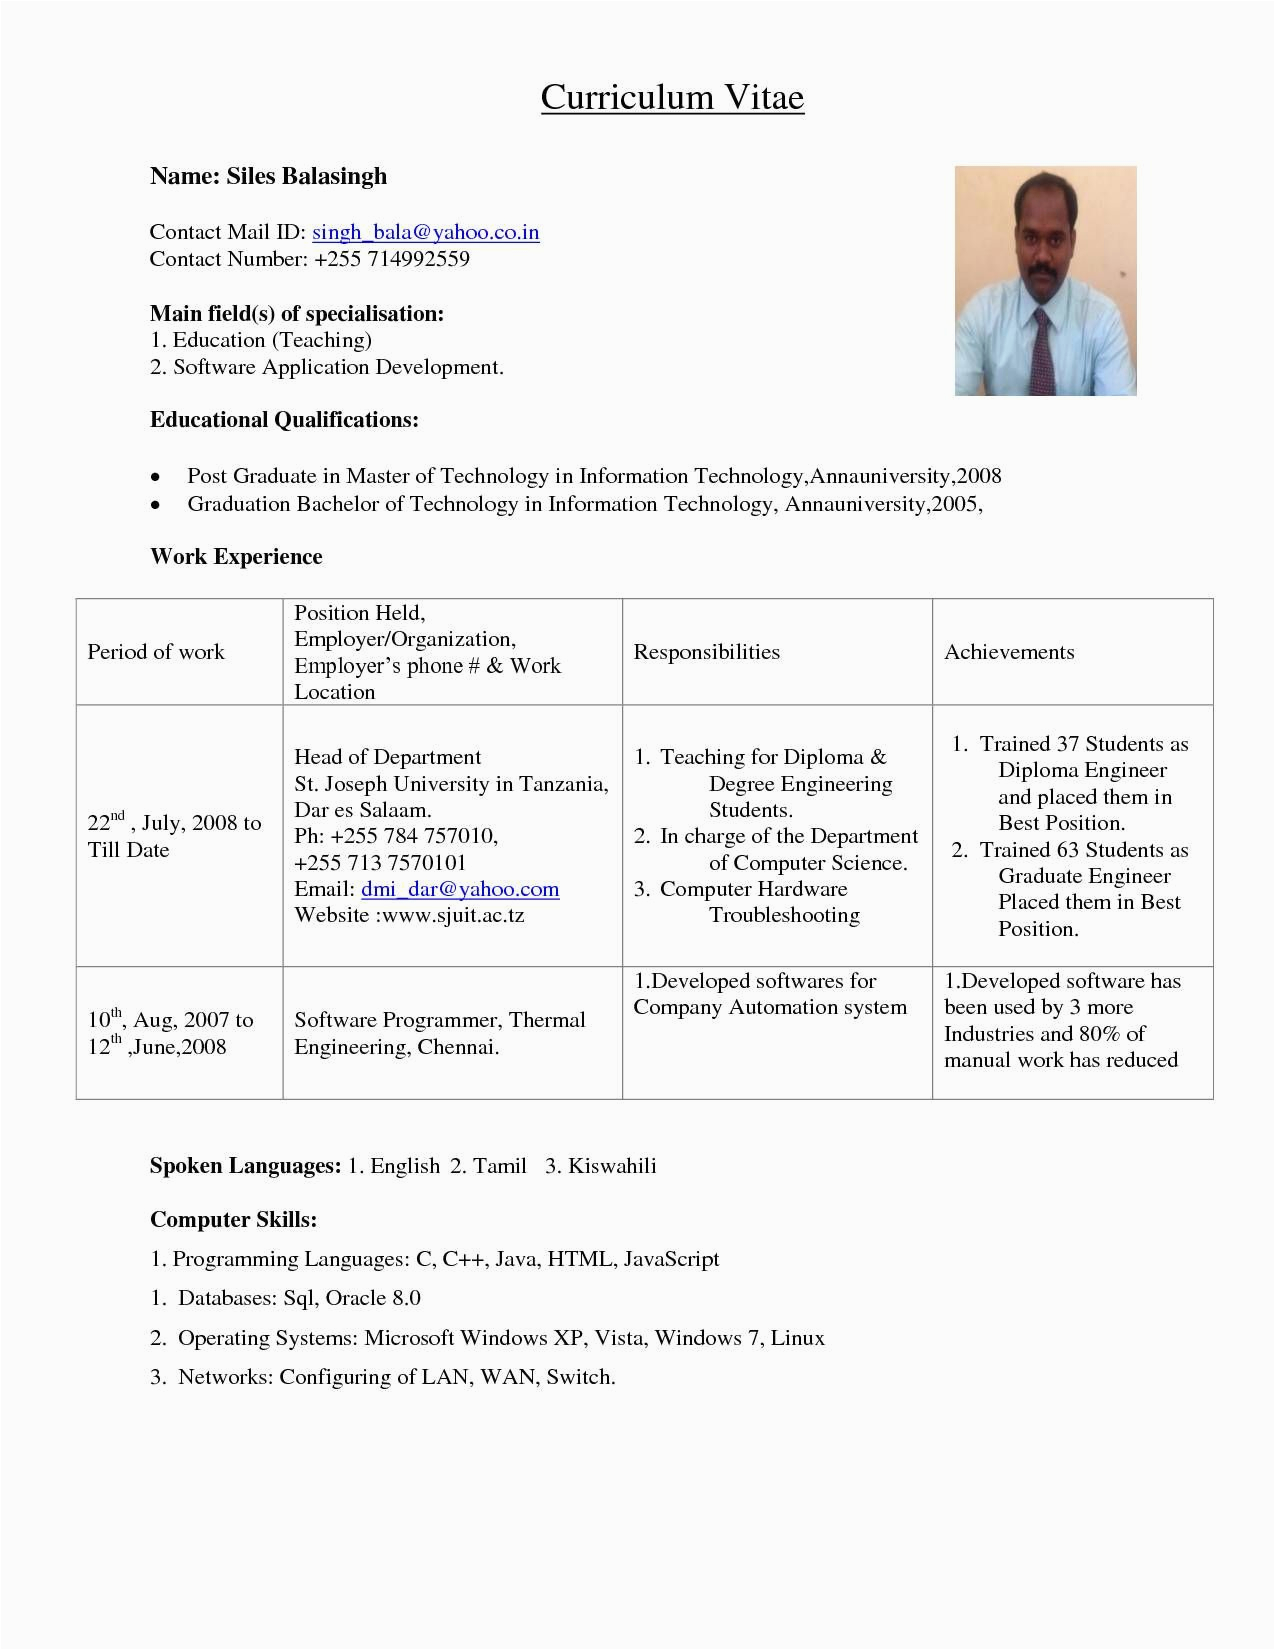 Sample Resume for assistant Professor In India Sample Resume format for assistant Professor In Engineering